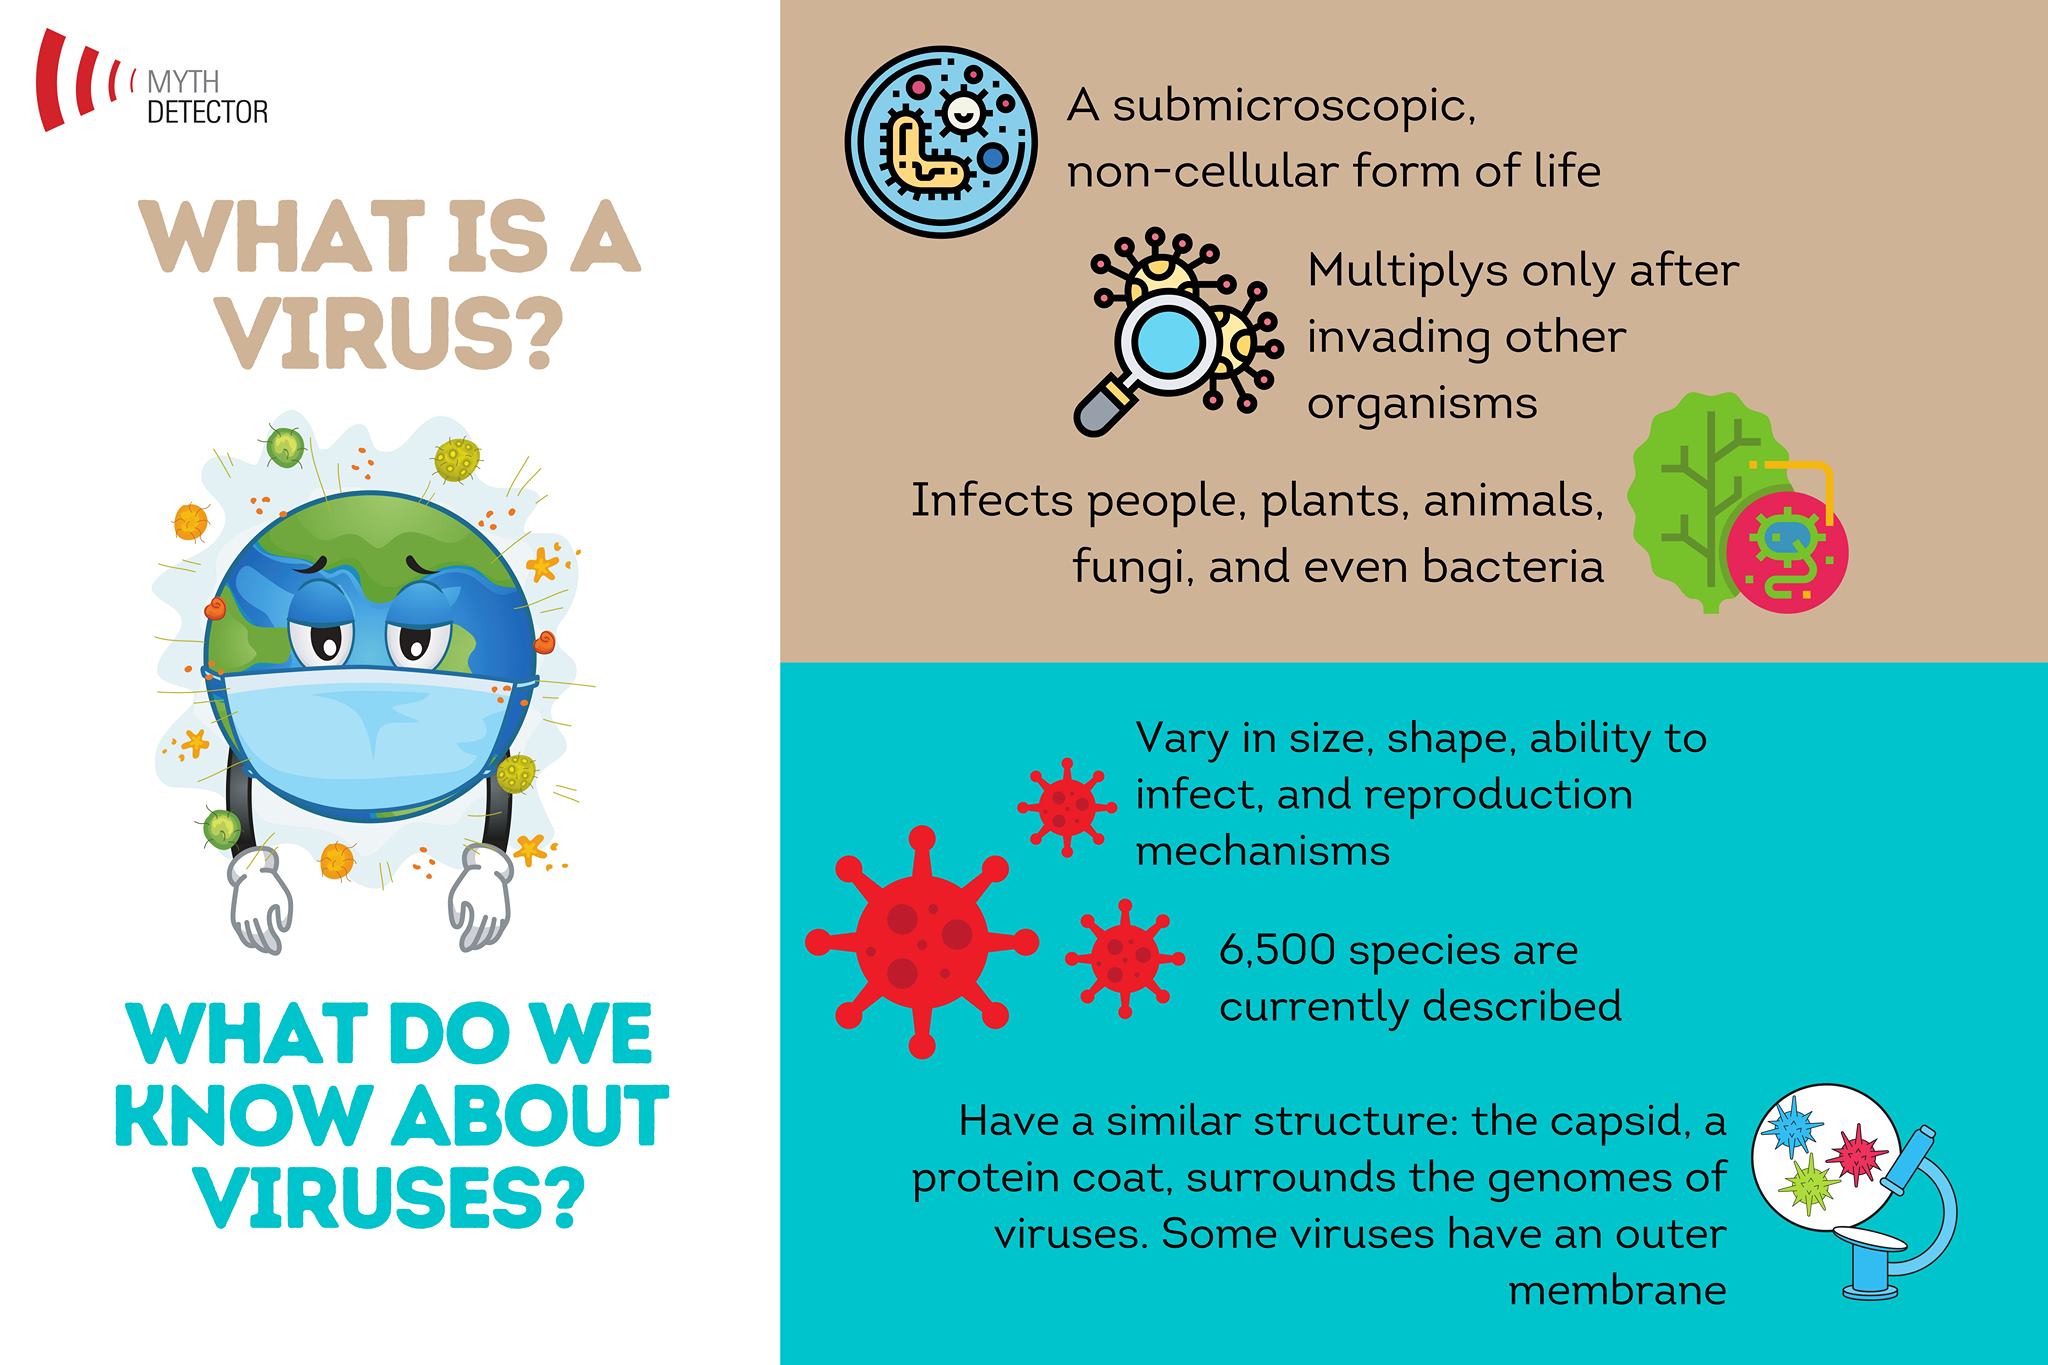 What do we know about viruses?